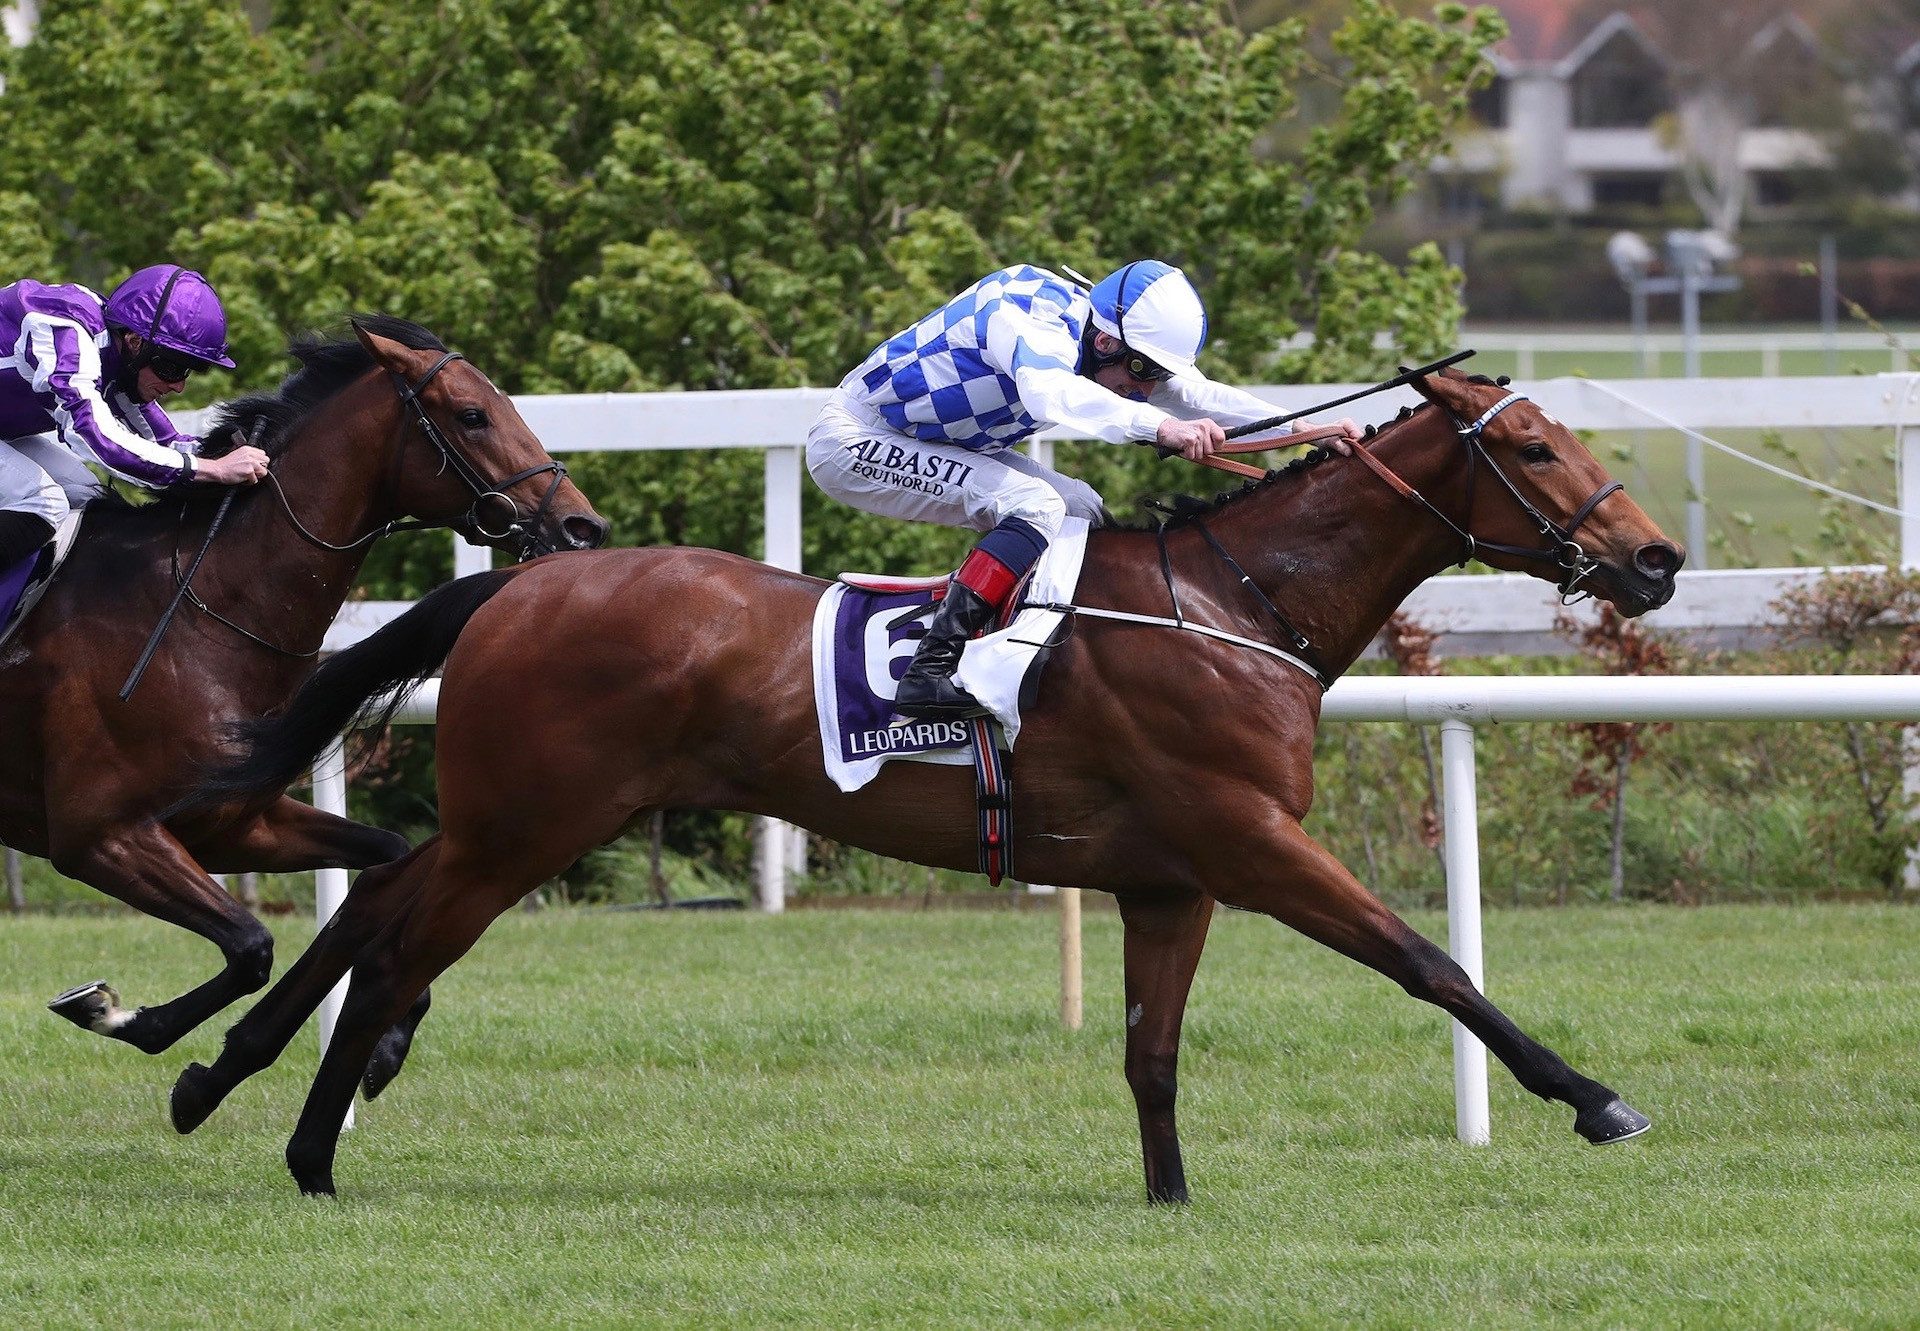 Eaglefield (Gleneagles) Wins His Maiden At Leopardstown